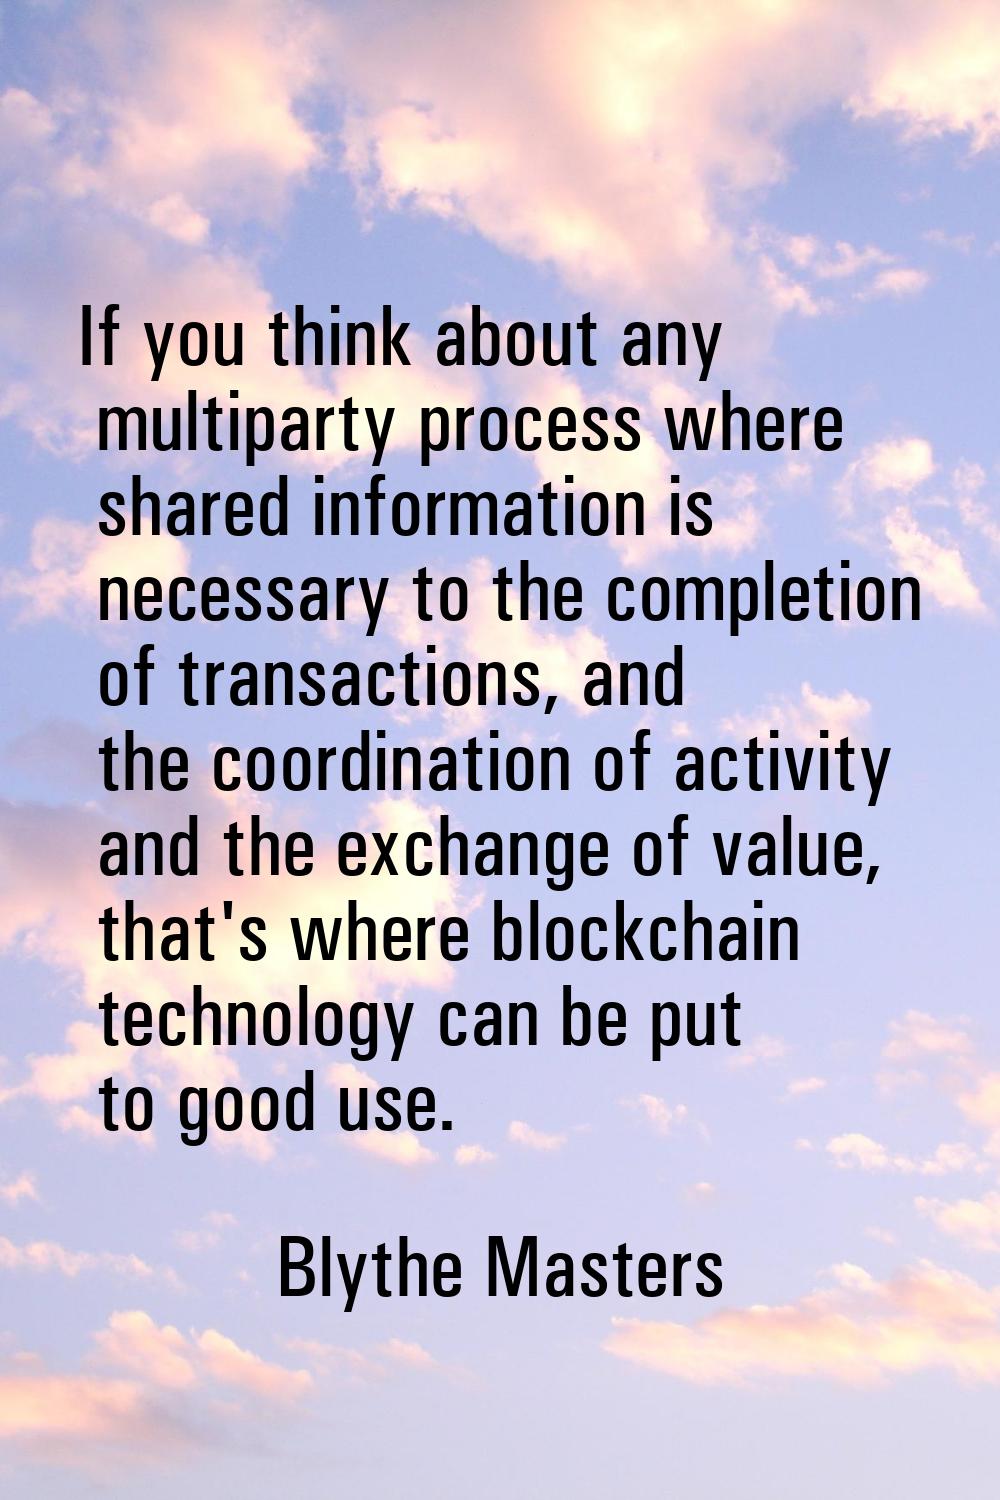 If you think about any multiparty process where shared information is necessary to the completion o